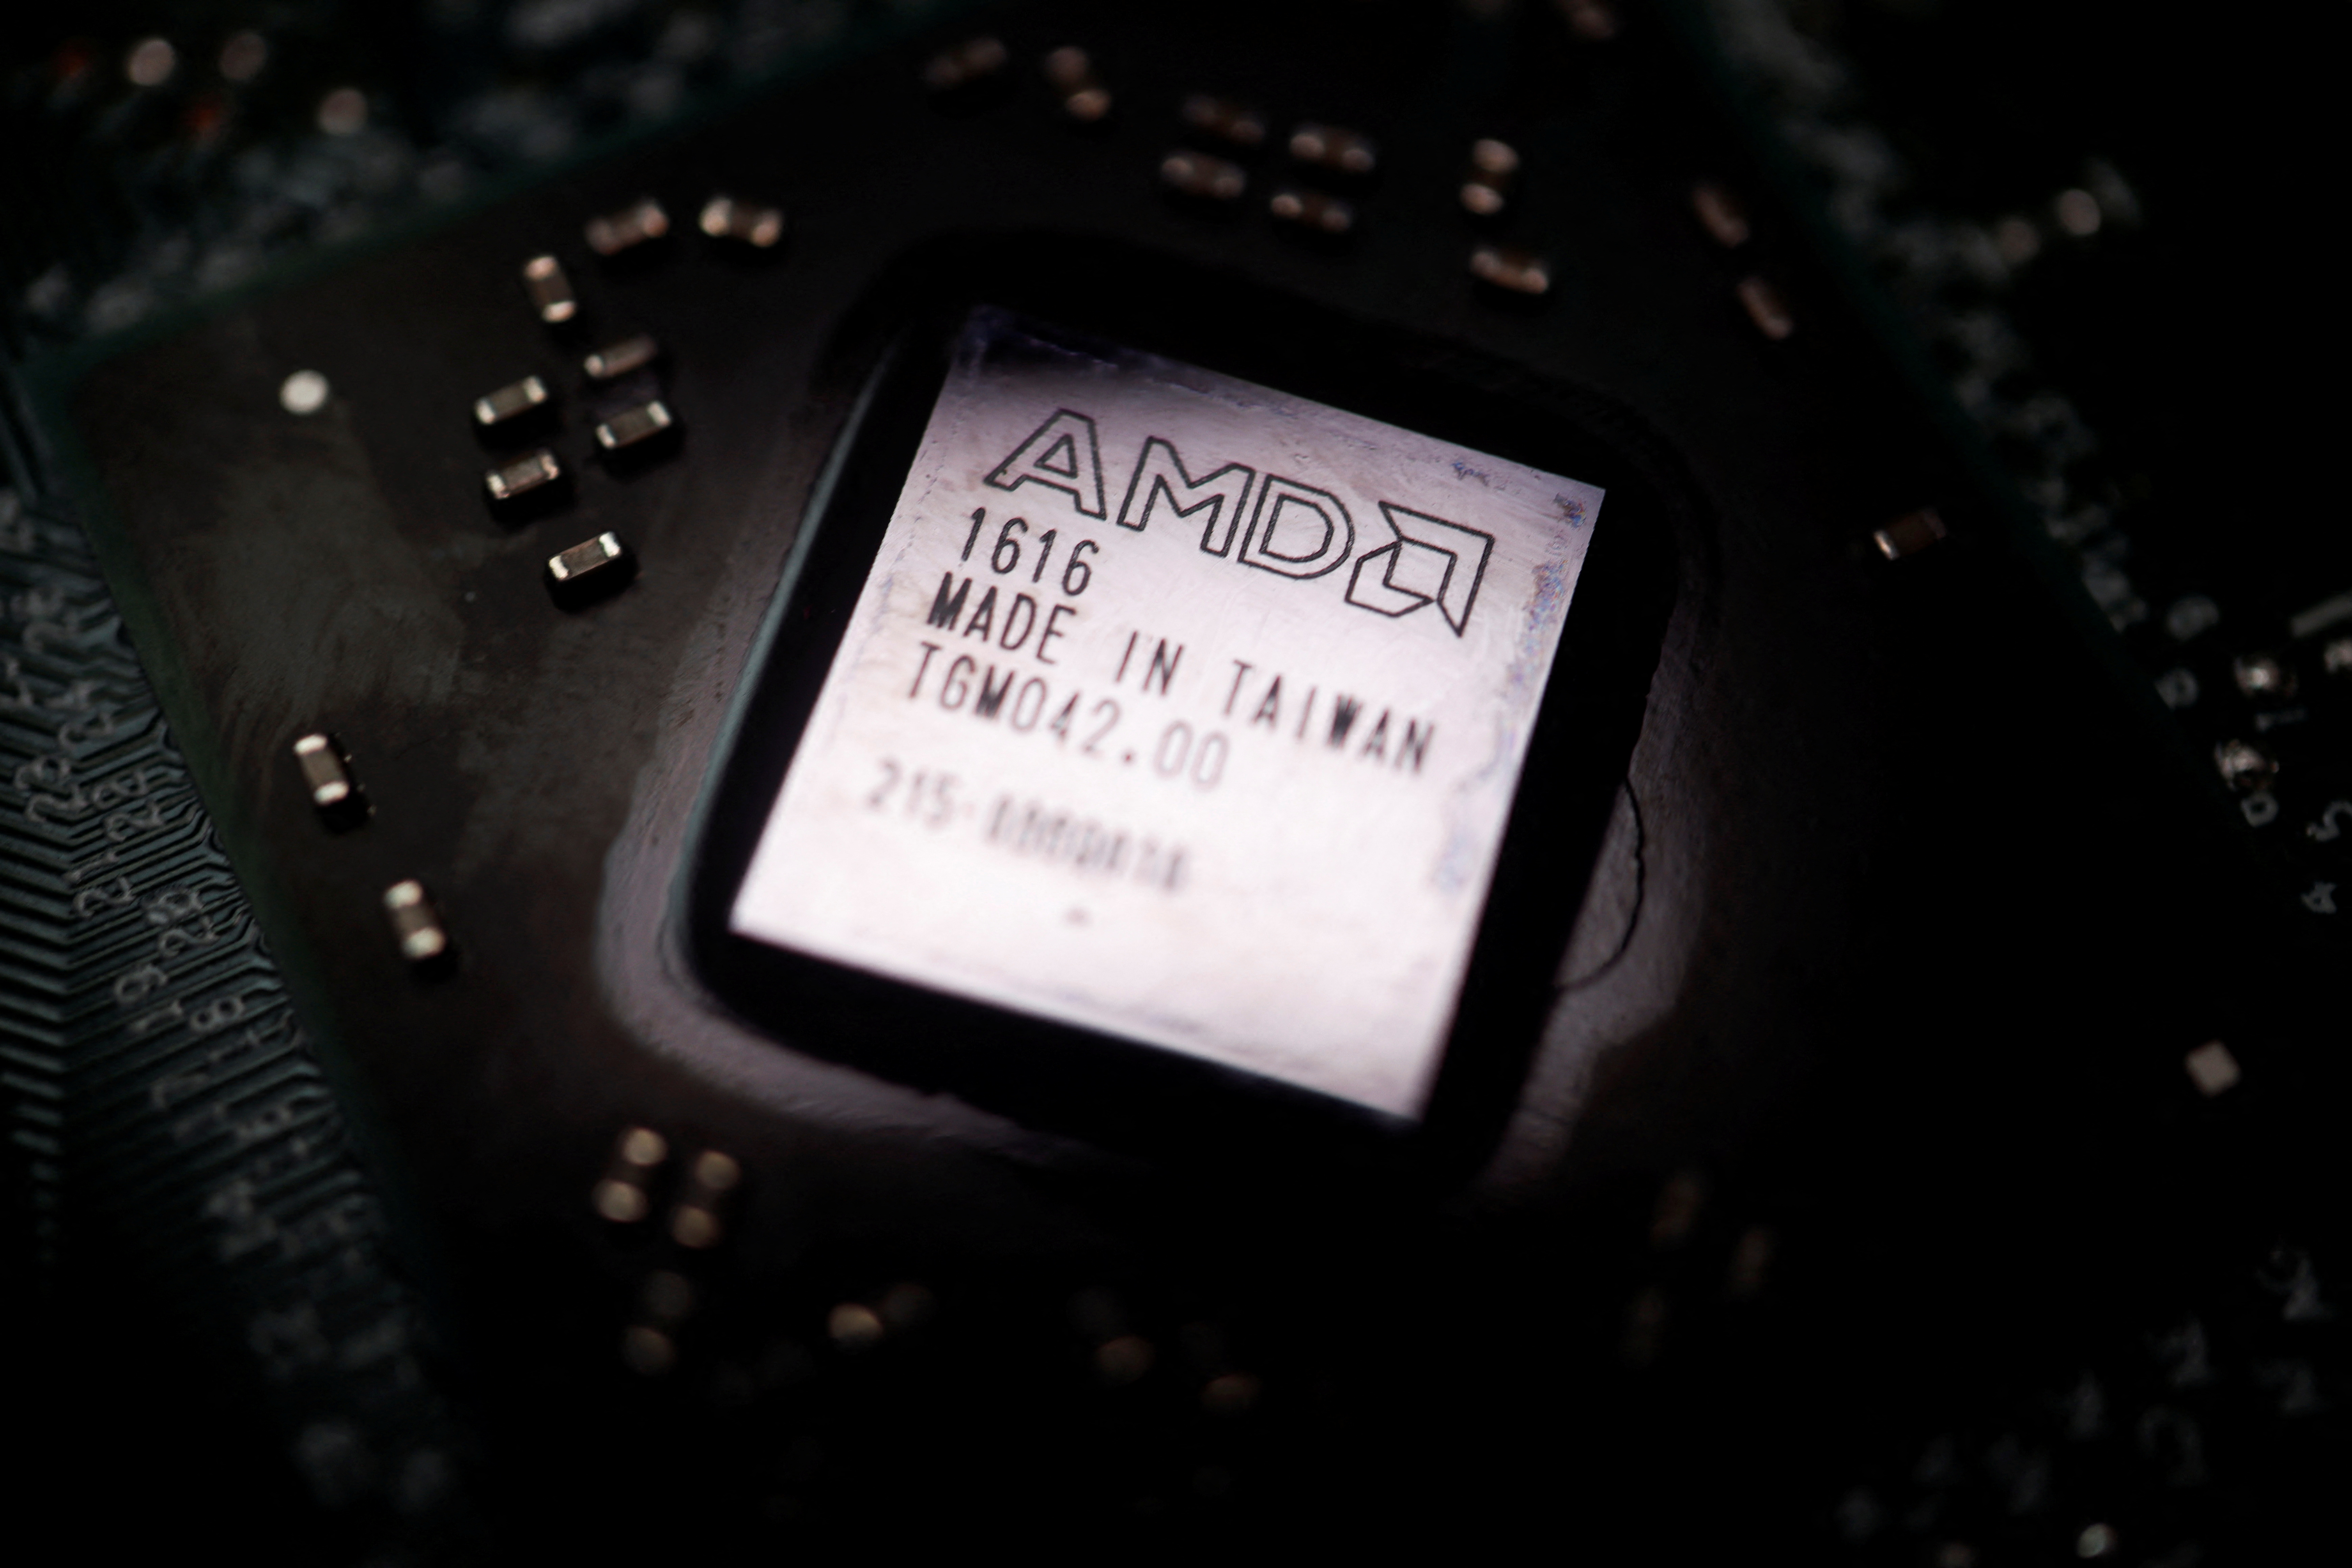 Illustration picture of AMD chip